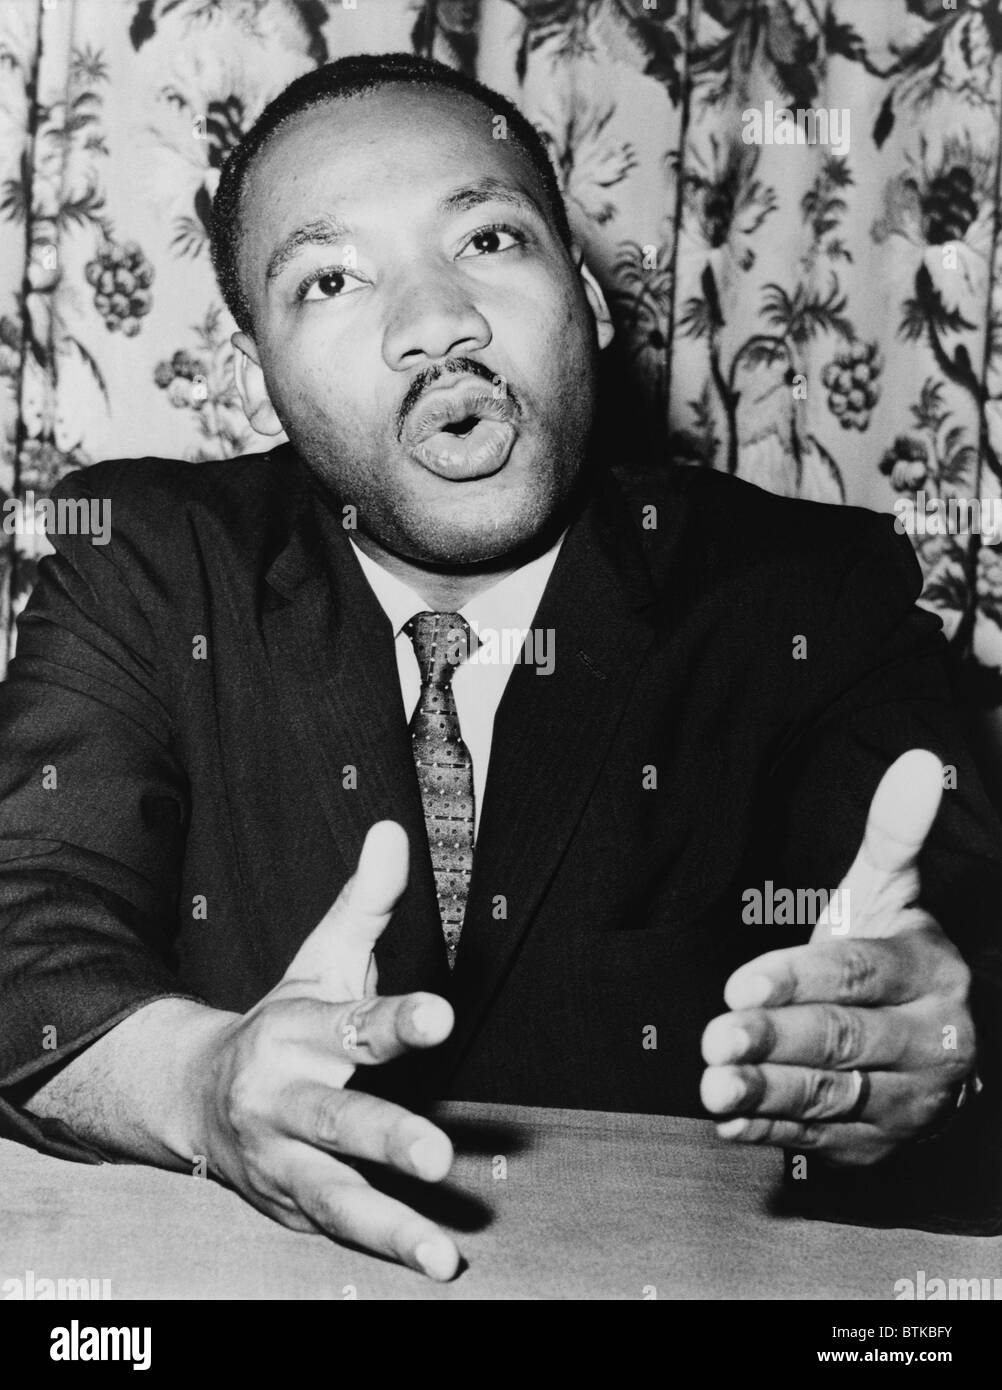 At a press conference on June 5, 1961, Rev. Martin Luther King, Jr. asks that President Kennedy declare all forms of racial segregation illegal. King was also unsuccessful in convincing Kennedy to officially celebrate the 100 year anniversary of the Emancipation Proclamation. Stock Photo